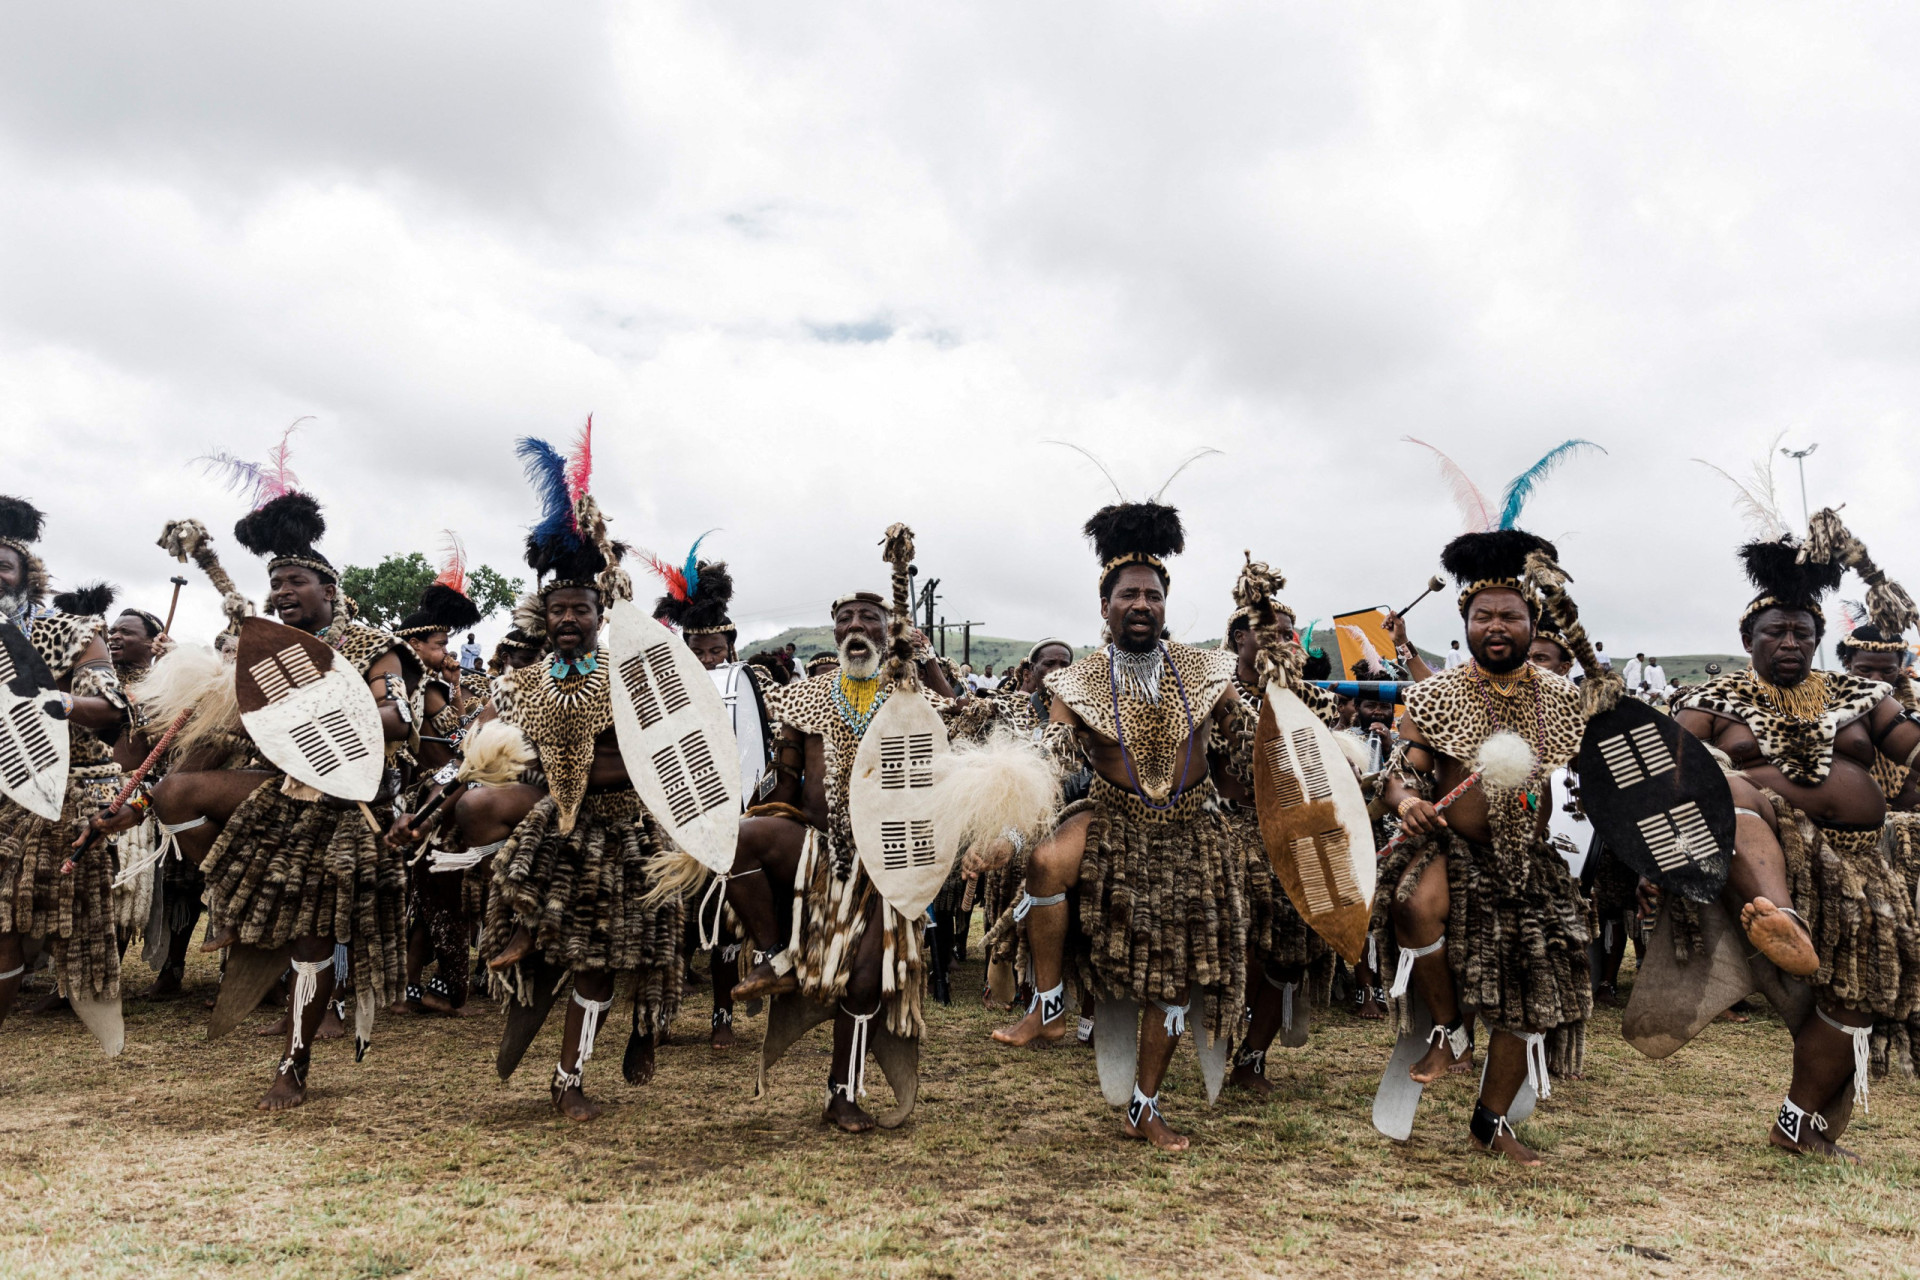 <p>The Zulu culture is one of the largest ethnic groups in South Africa. They are known for their rich cultural heritage–including vibrant traditions, music, and dance–and the historic Zulu Kingdom led by figures like King Shaka.</p><p><a href="https://www.msn.com/en-us/community/channel/vid-7xx8mnucu55yw63we9va2gwr7uihbxwc68fxqp25x6tg4ftibpra?cvid=94631541bc0f4f89bfd59158d696ad7e">Follow us and access great exclusive content every day</a></p>